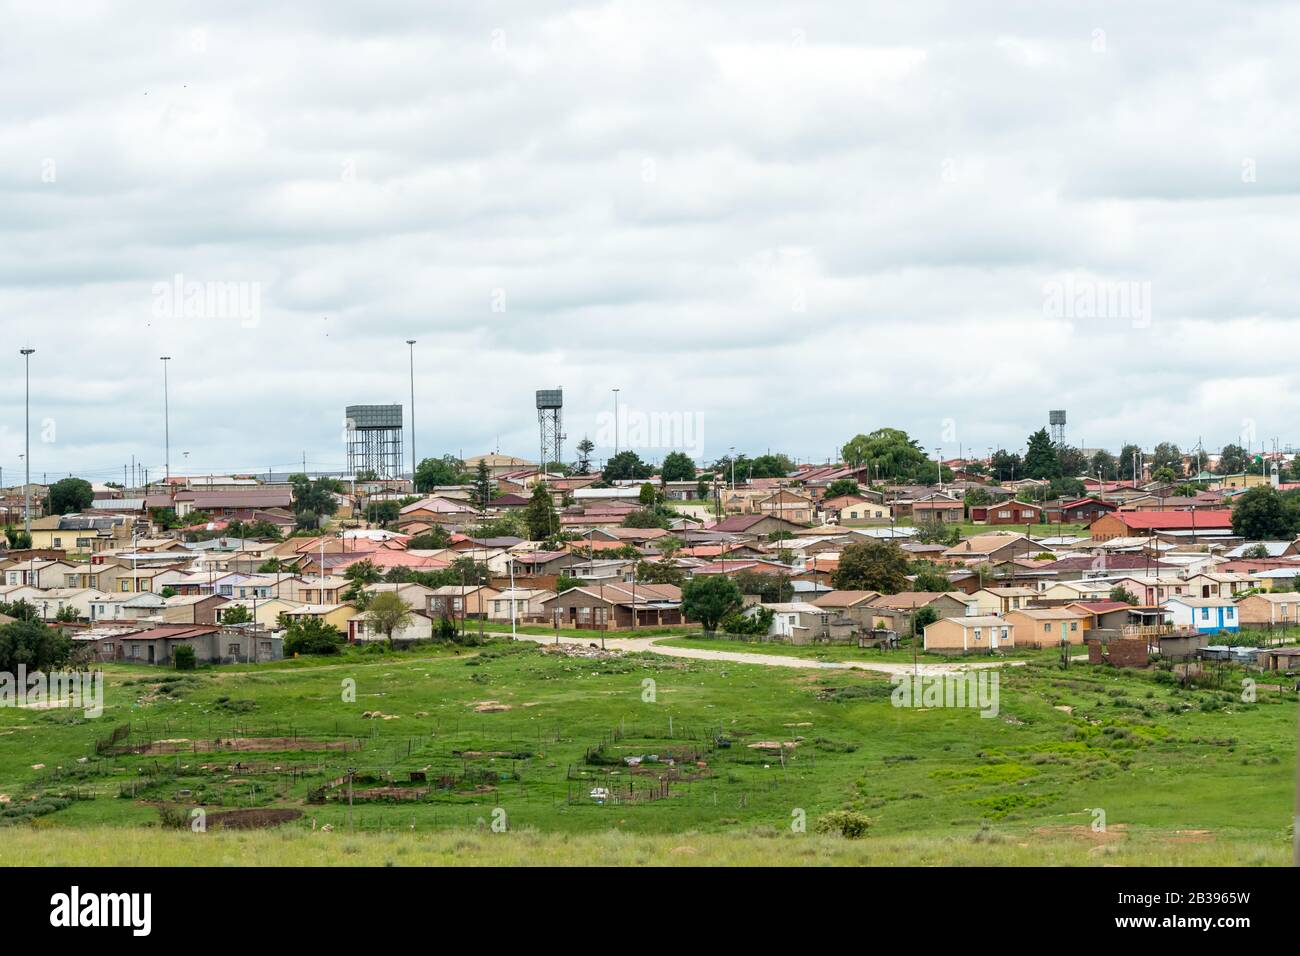 South African small town and community in Free State Province, South Africa showing low cost housing Stock Photo